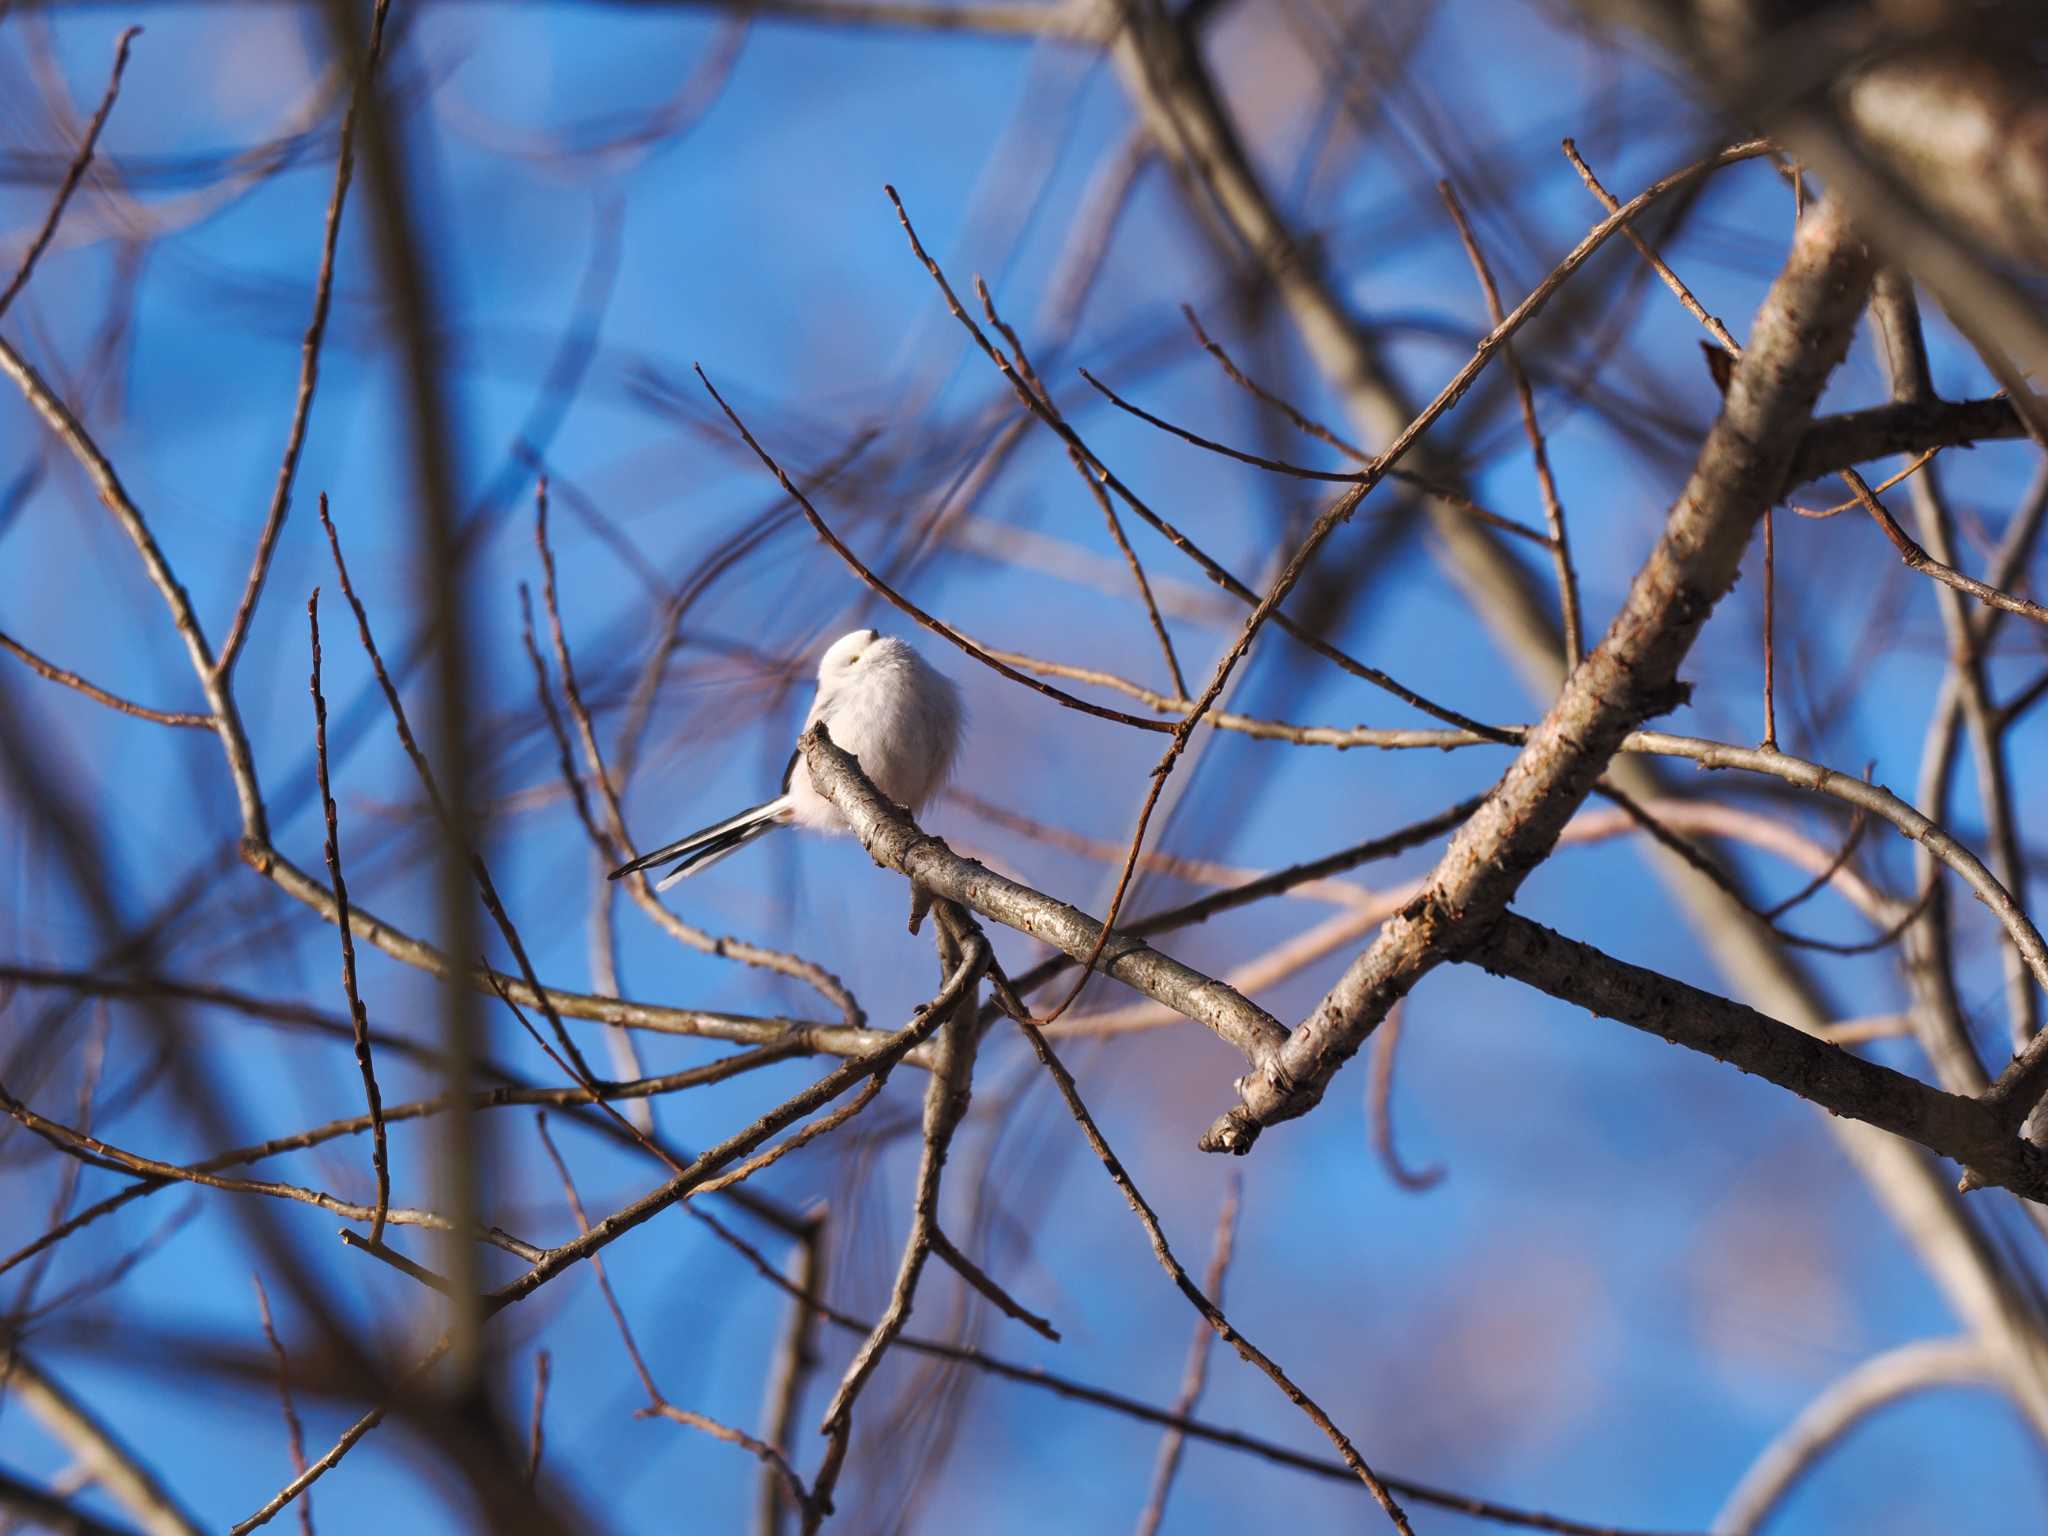 Photo of Long-tailed tit(japonicus) at 星観緑地(札幌市手稲区) by 98_Ark (98ｱｰｸ)